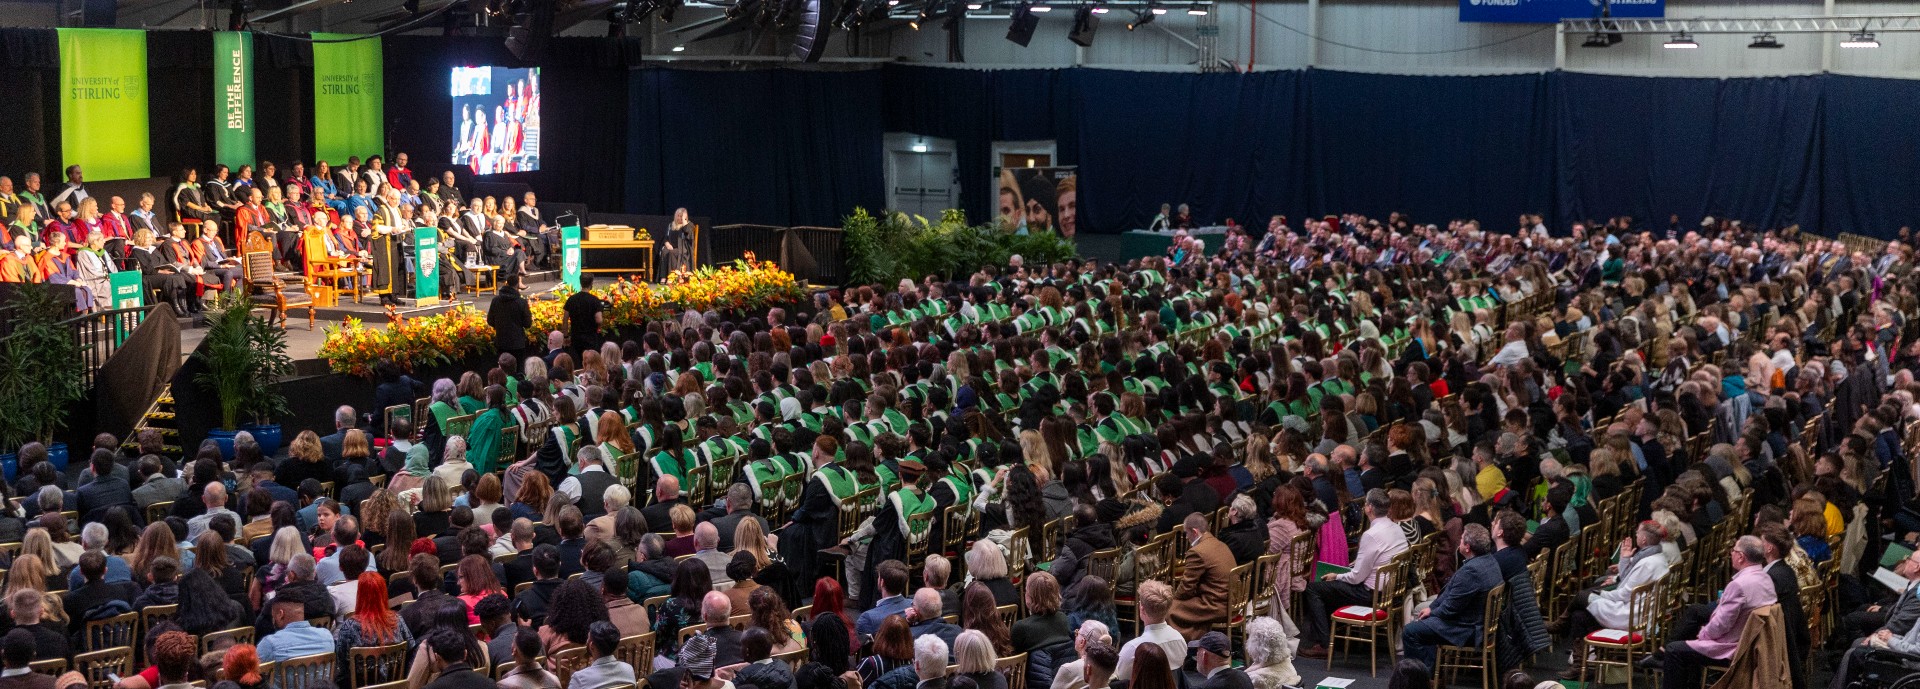 The graduation hall showing a seated crowd and members of University staff on stage during a ceremony.